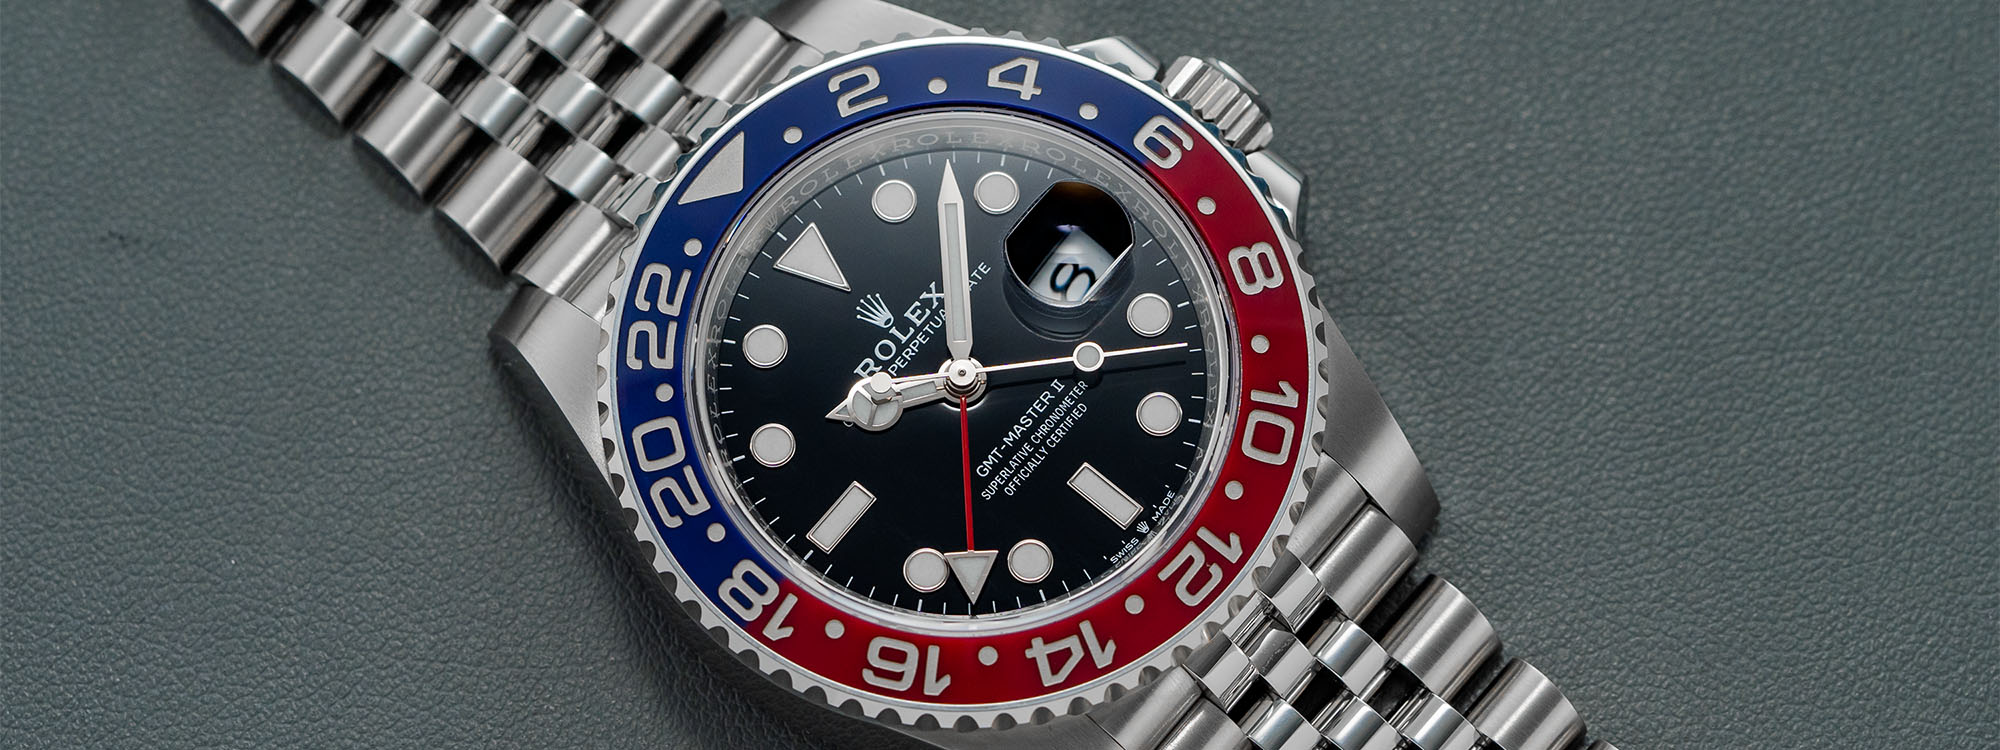 The Best Rolex Watches for Collectors and the Stories Behind Them